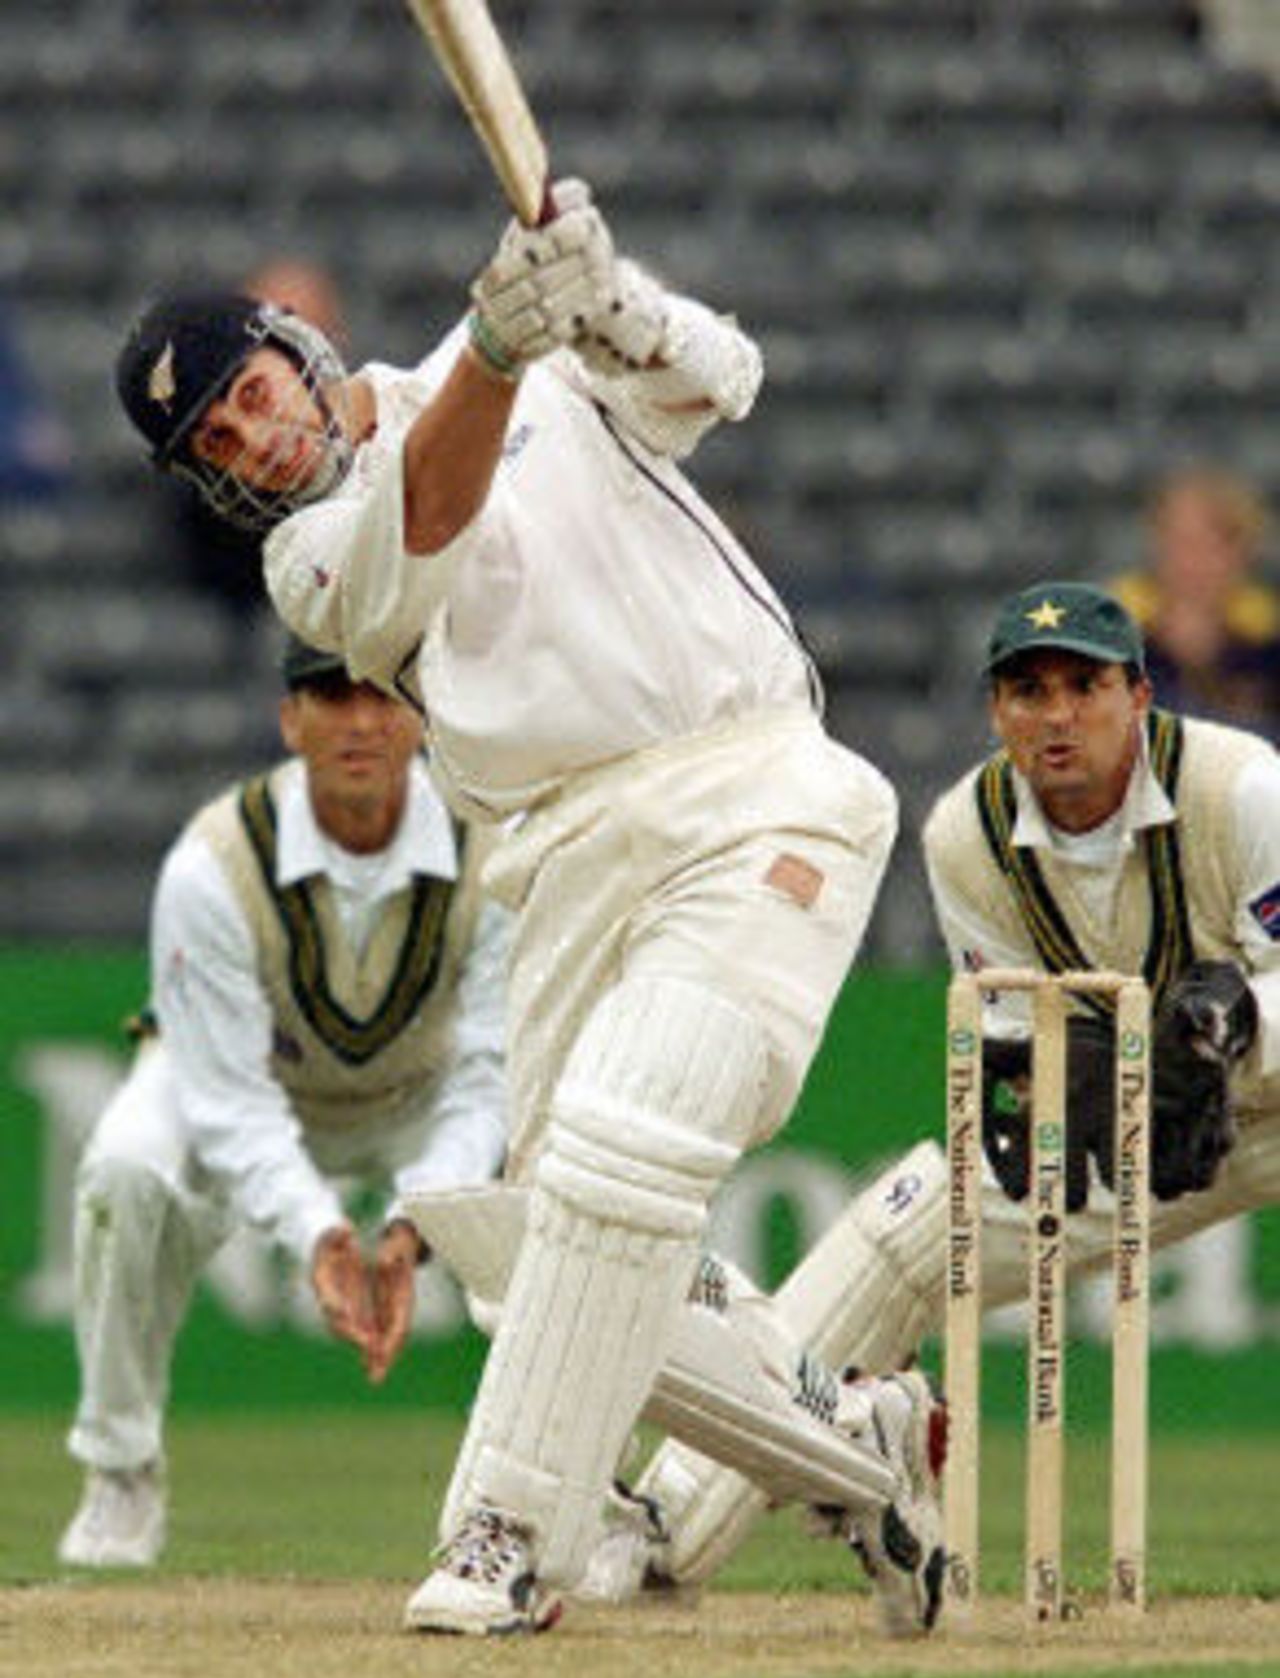 Mathew Sinclair lofts a ball for six on his way to scoring a century as Moin Khan and Younis Khan look on, day 1, 2nd Test at Christchurch, 15-19 March 2001.